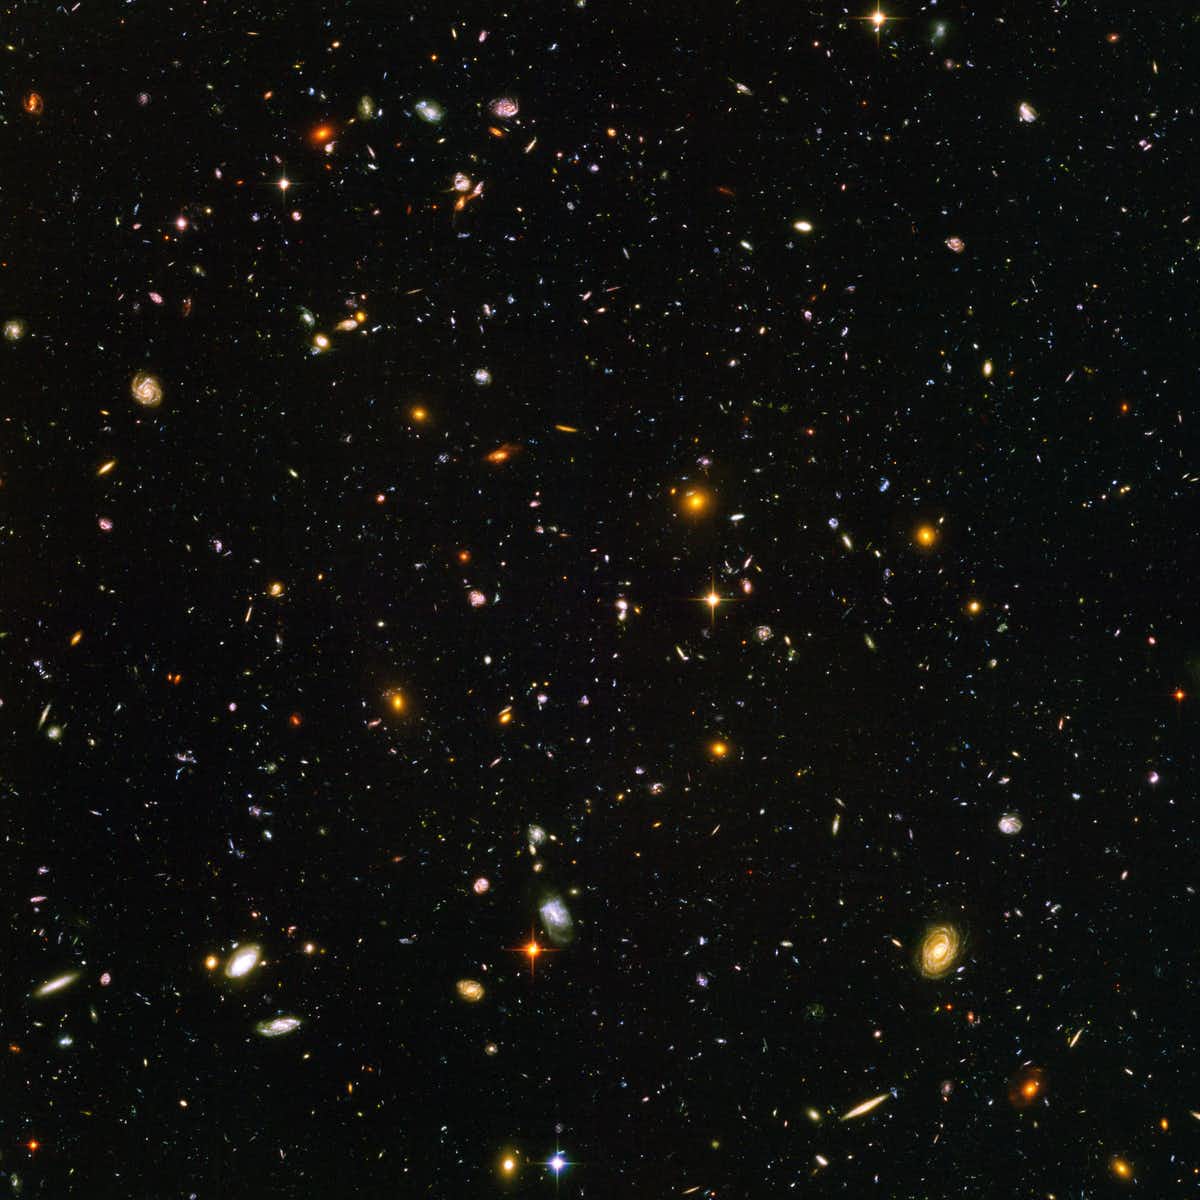 The Deep Field contains nearly 10,000 objects, almost all of which are very distant galaxies